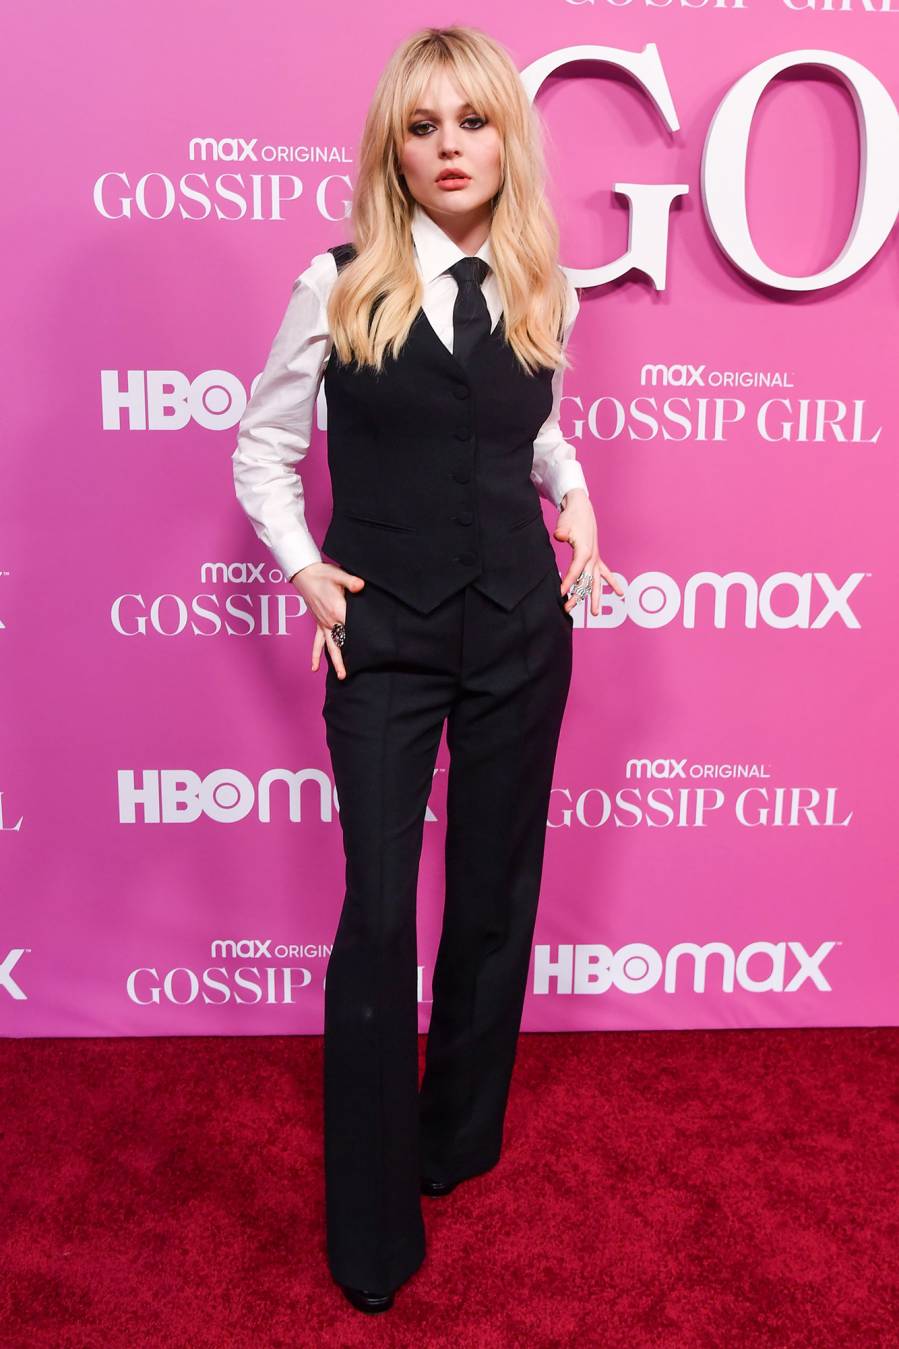 ‘Gossip Girl’ Premiere Red Carpet Fashion: See What the Stars Wore